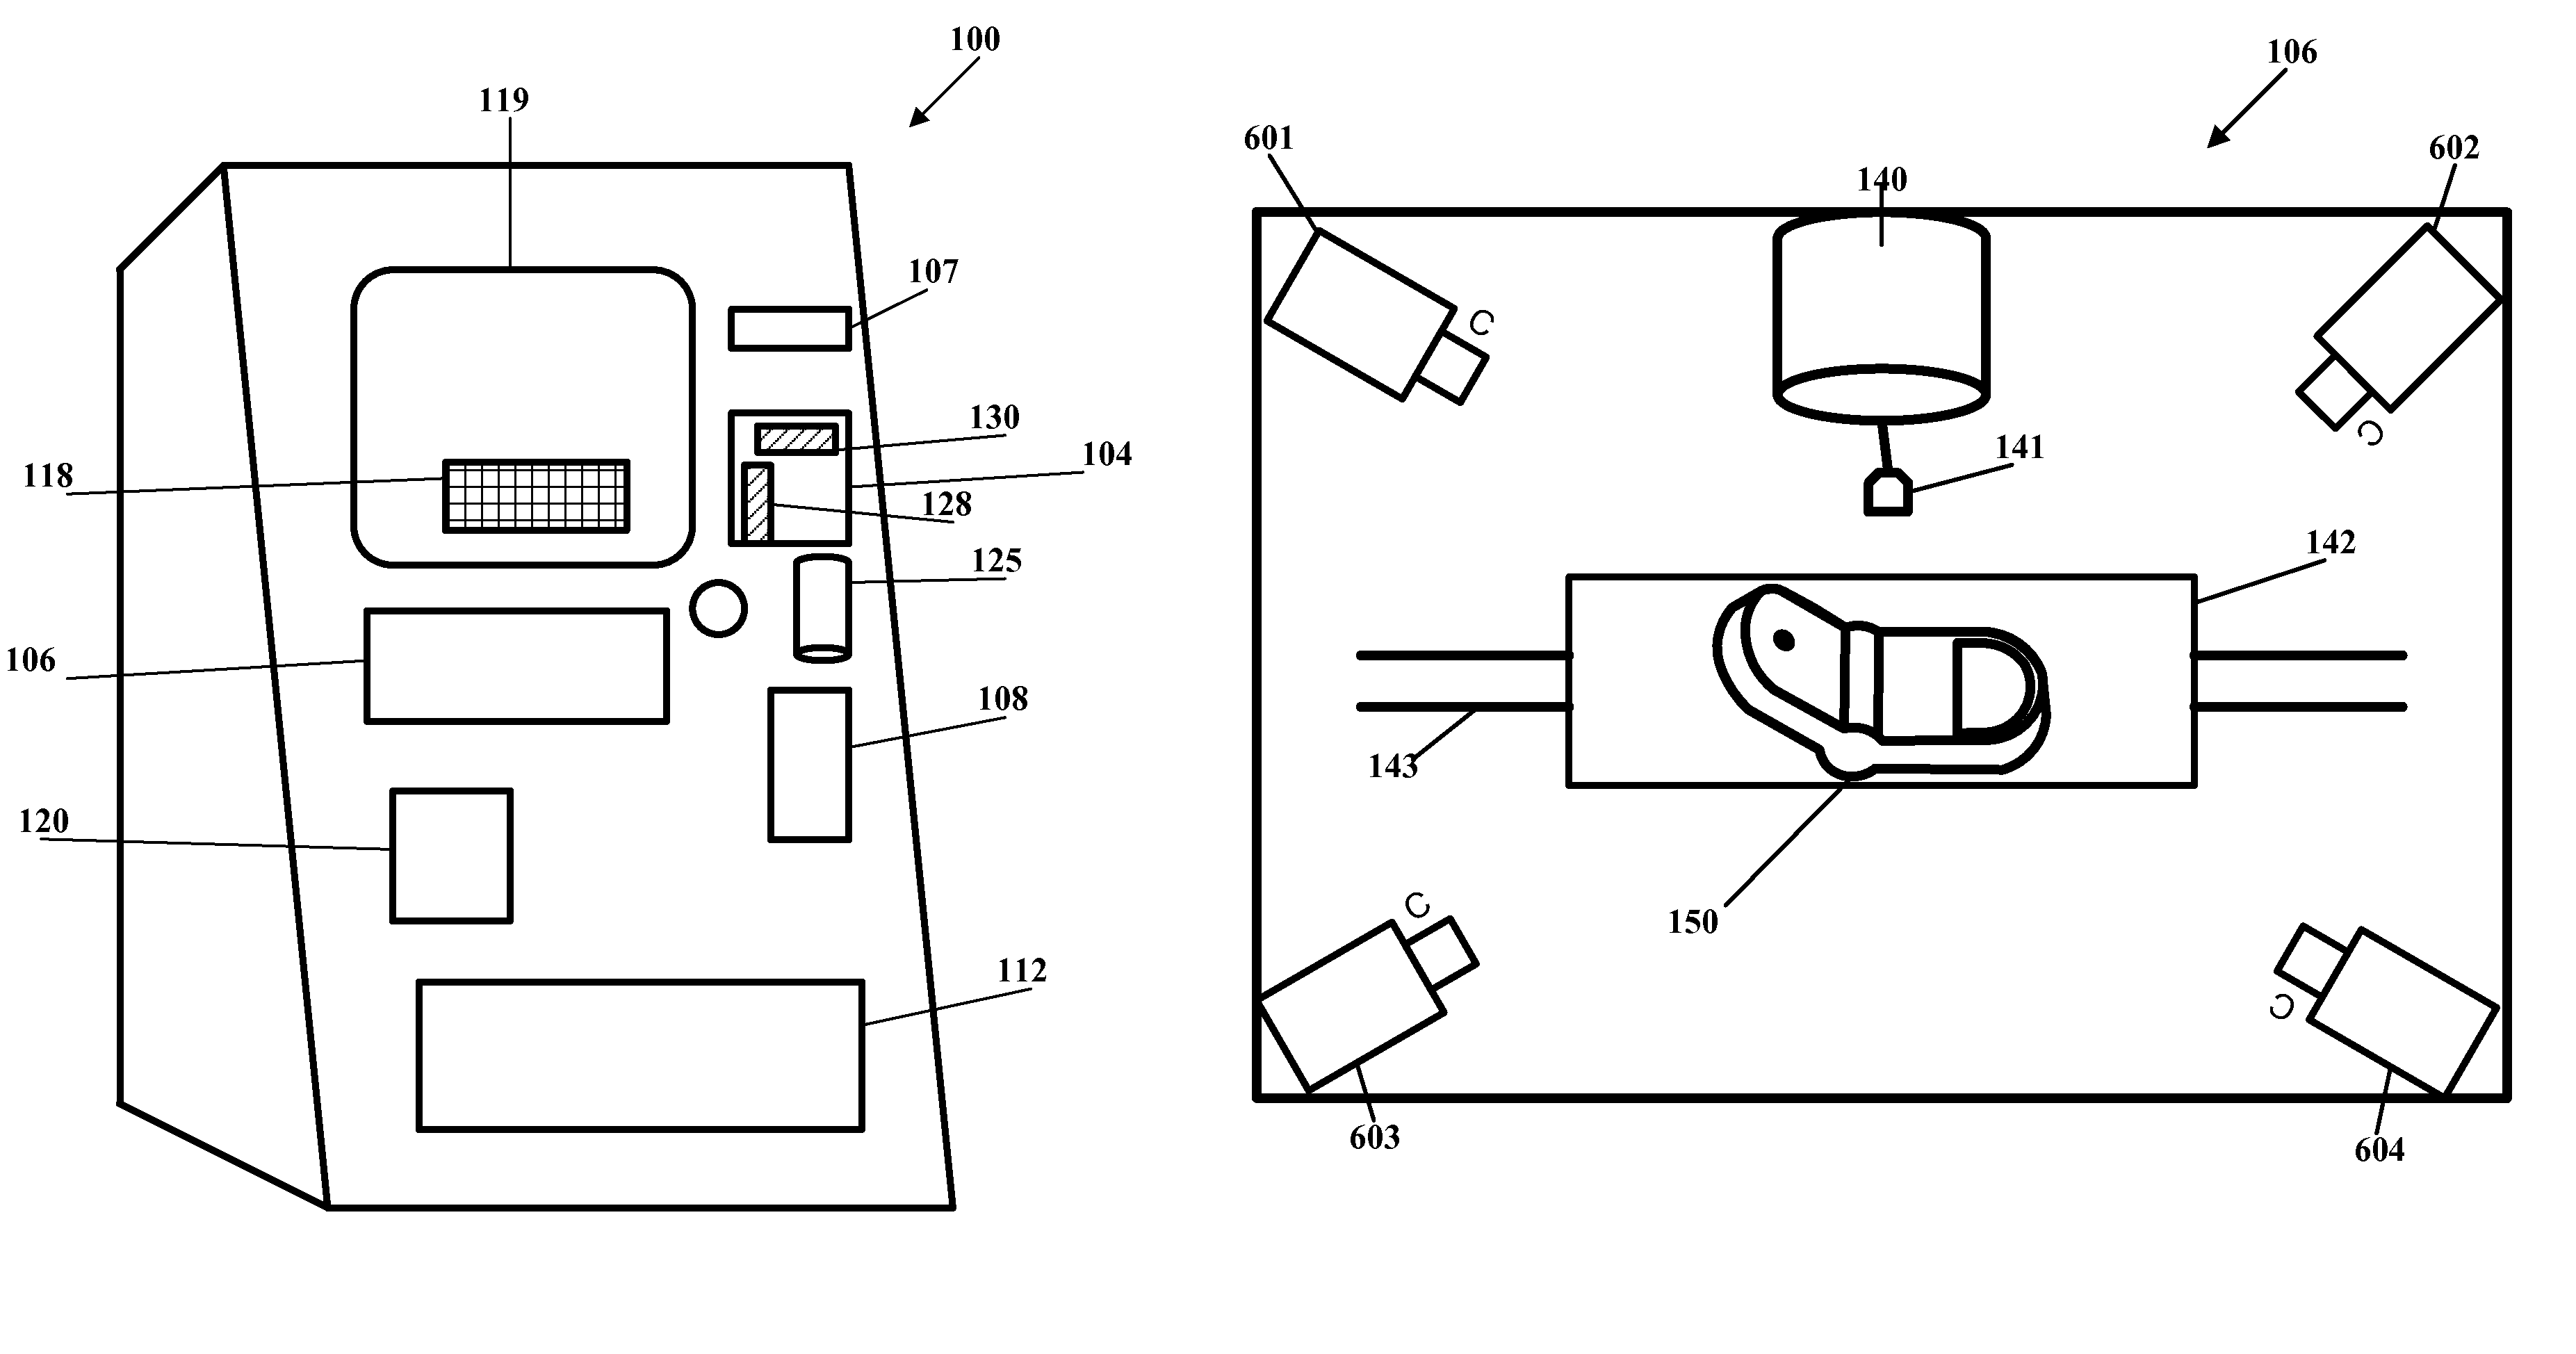 Secondary market and vending system for devices